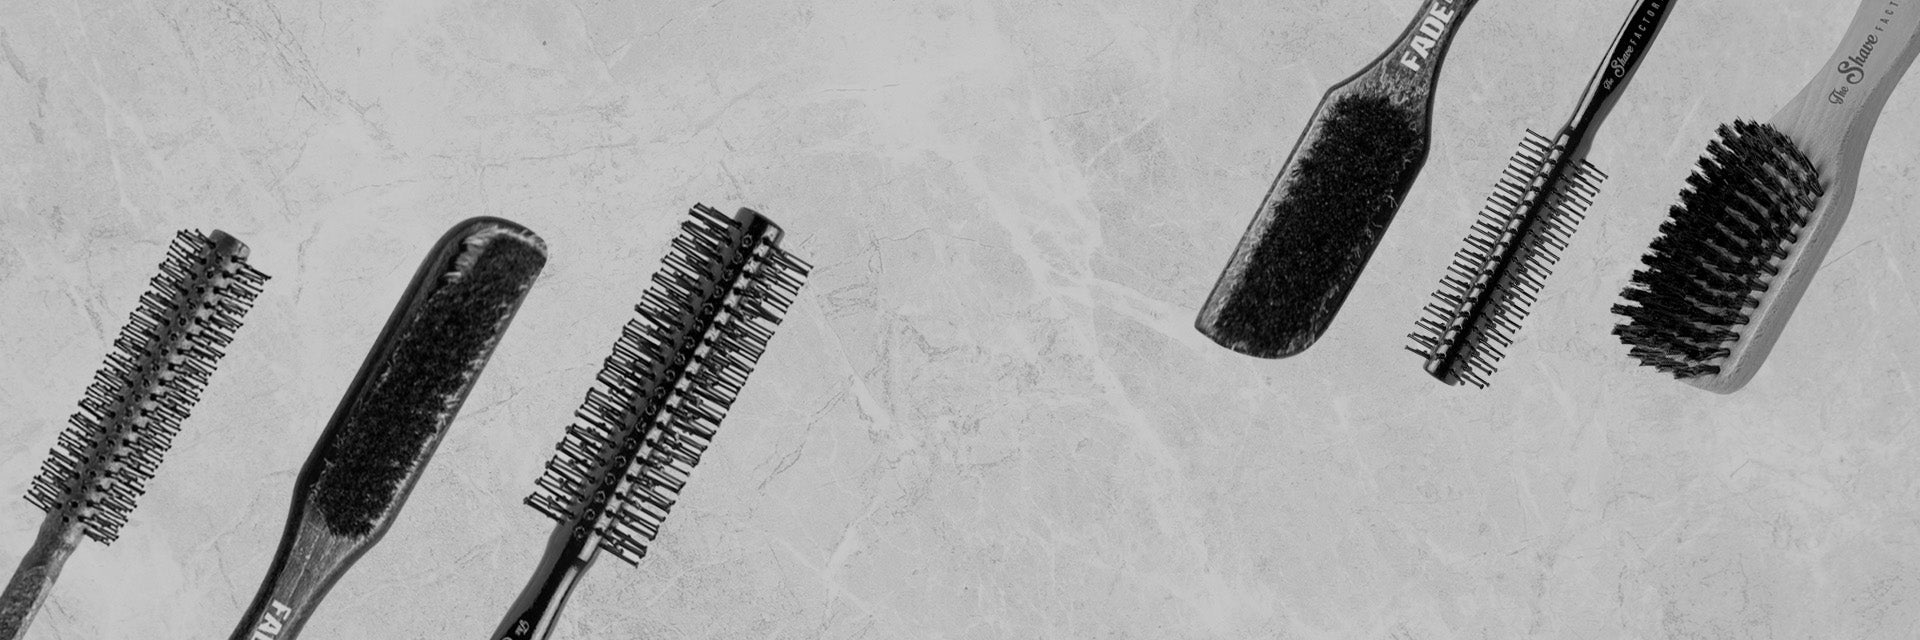 Hair Comb & Brushes